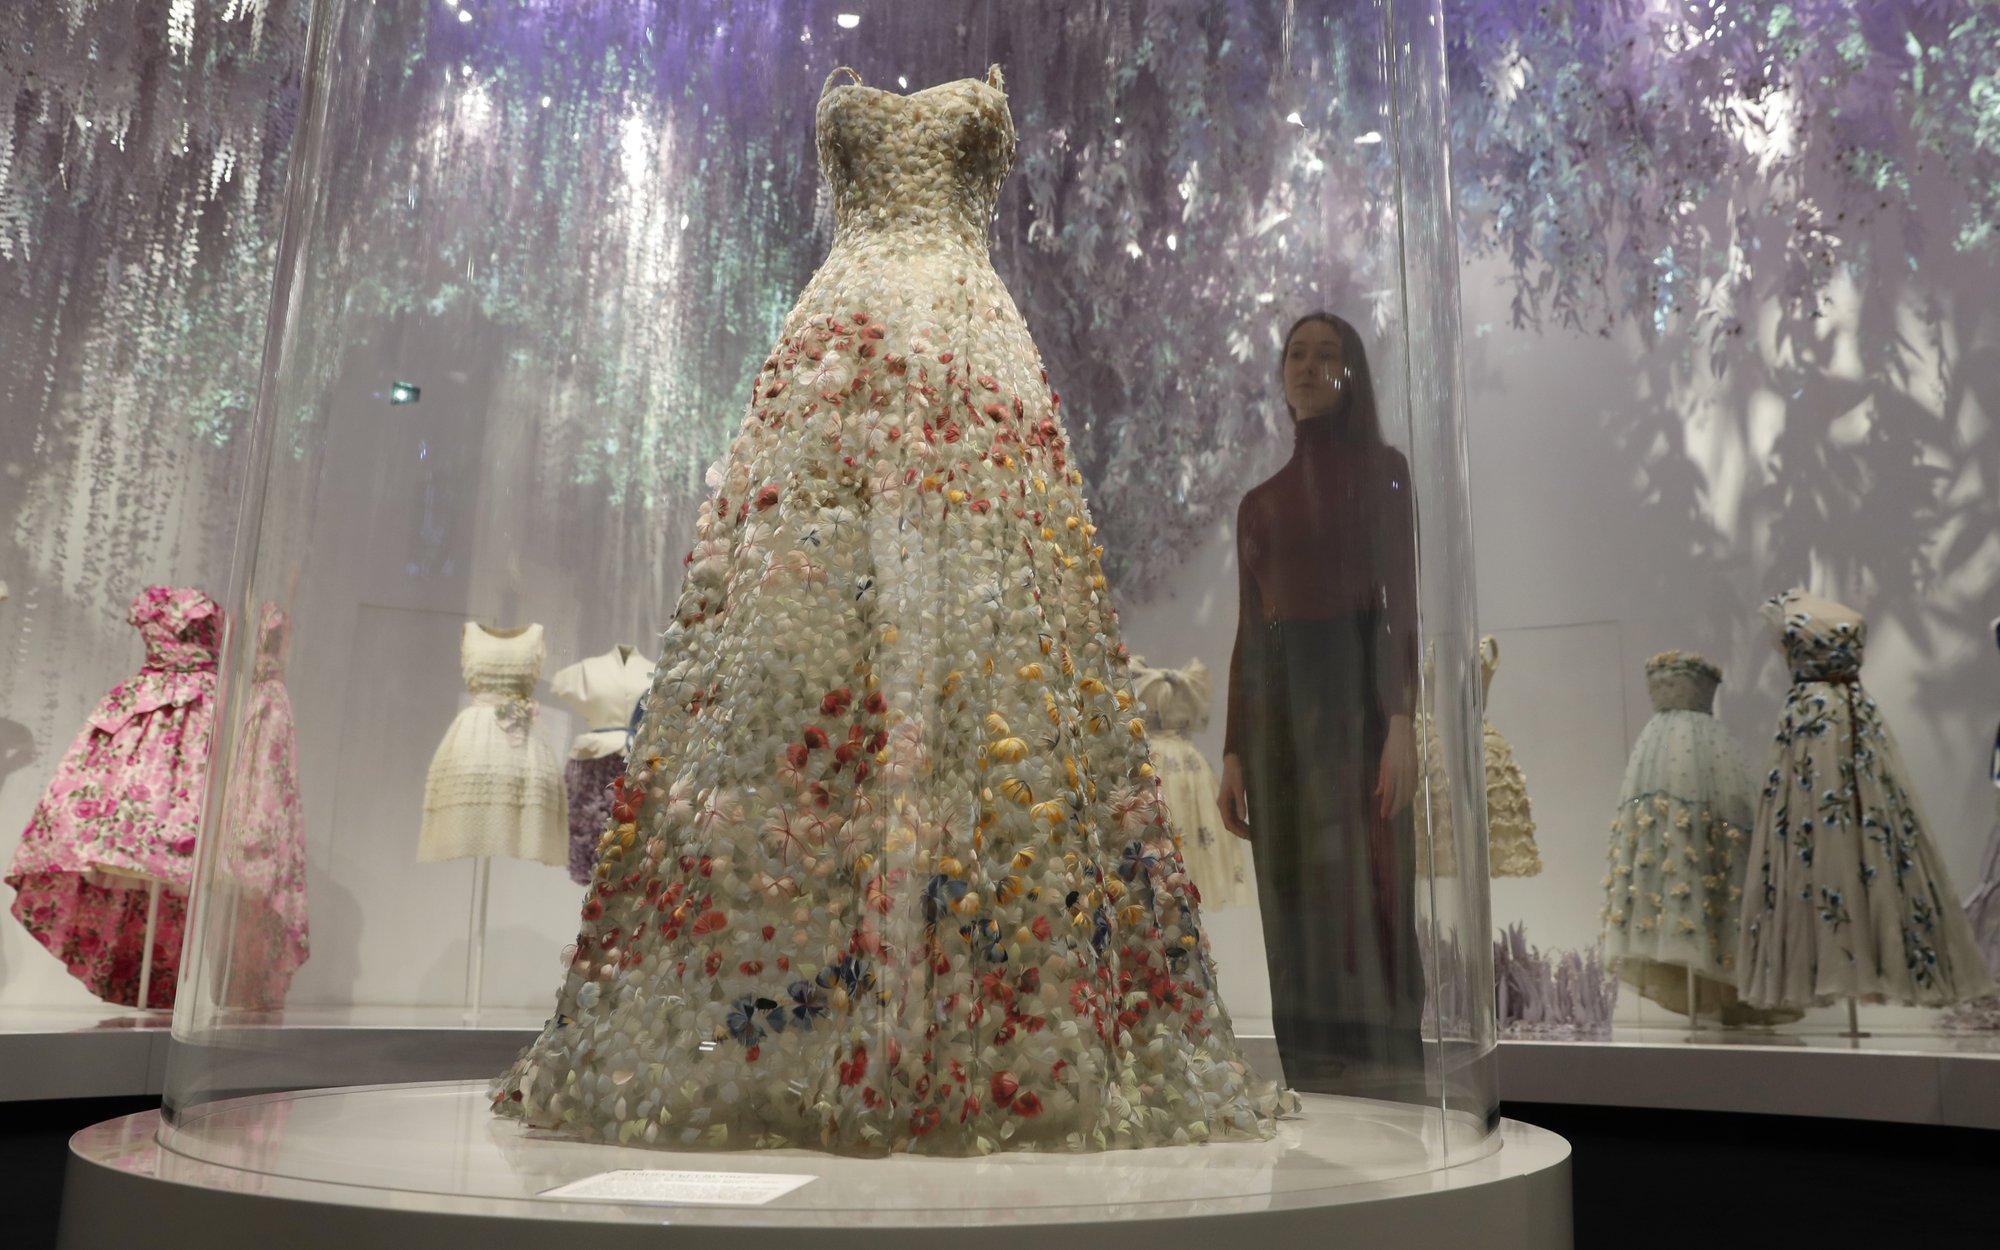 Ball gowns galore: London’s V&A Museum stages new Dior show